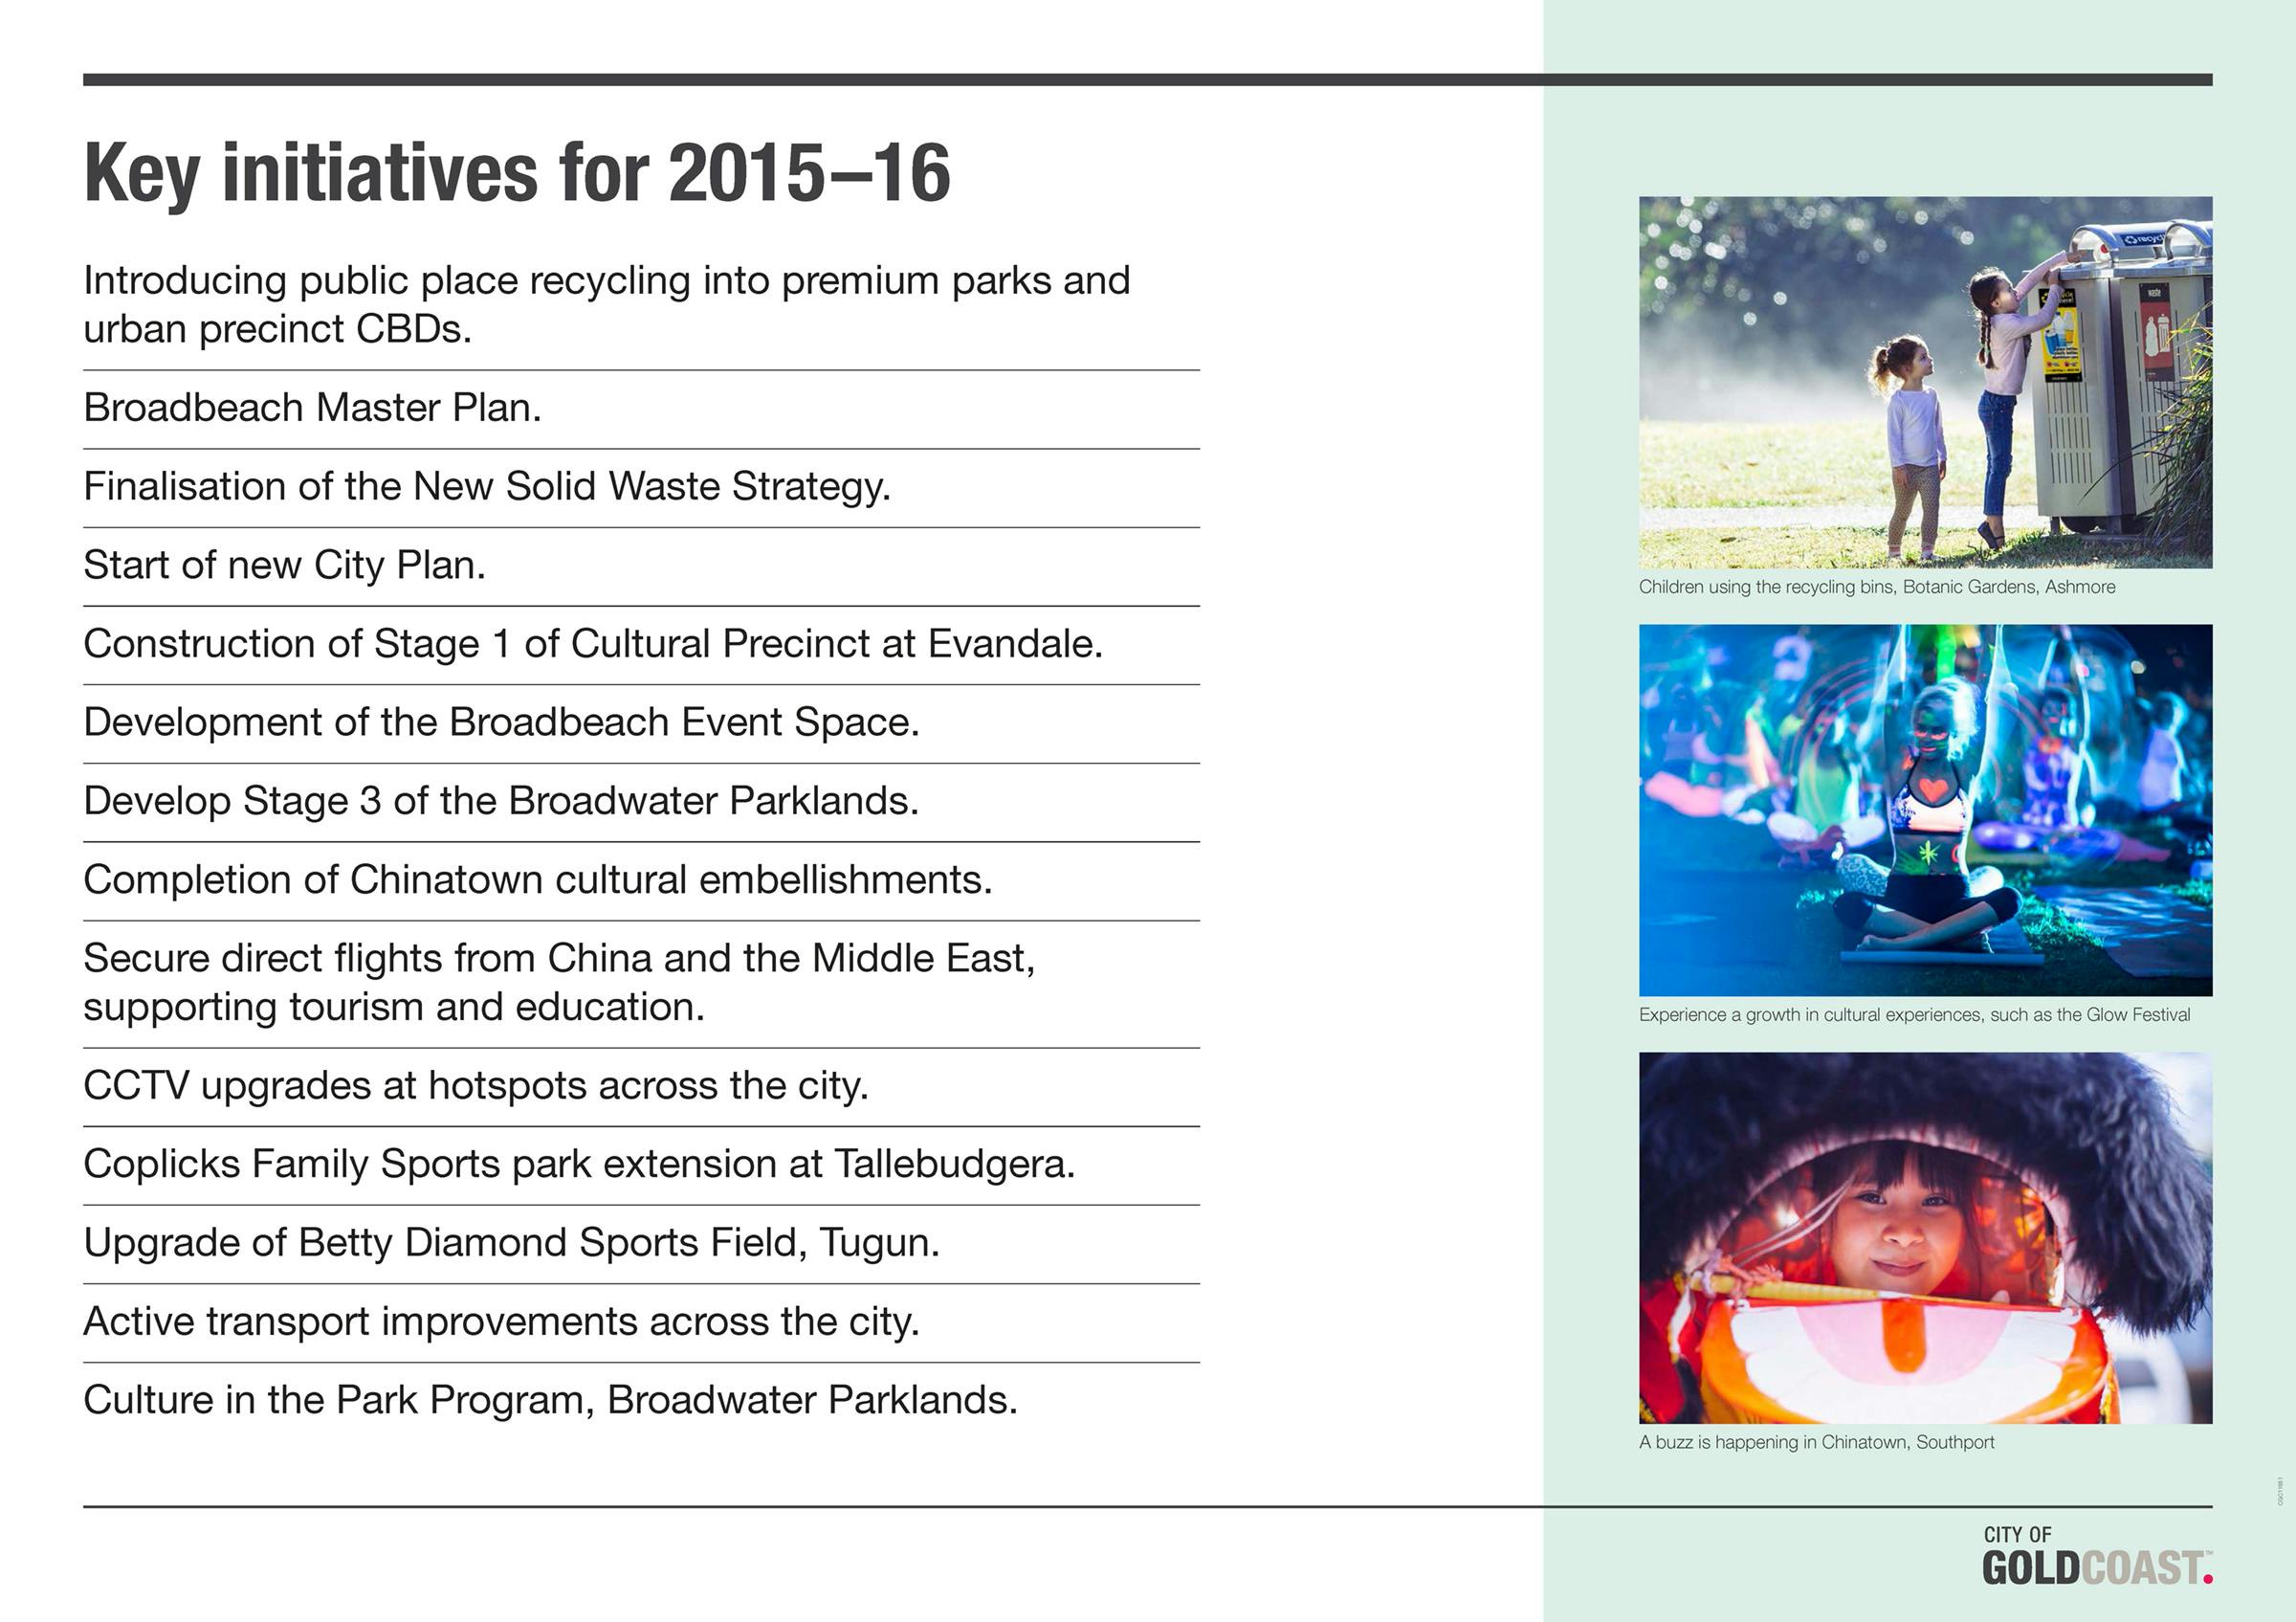 Key initiatives for 2015-16